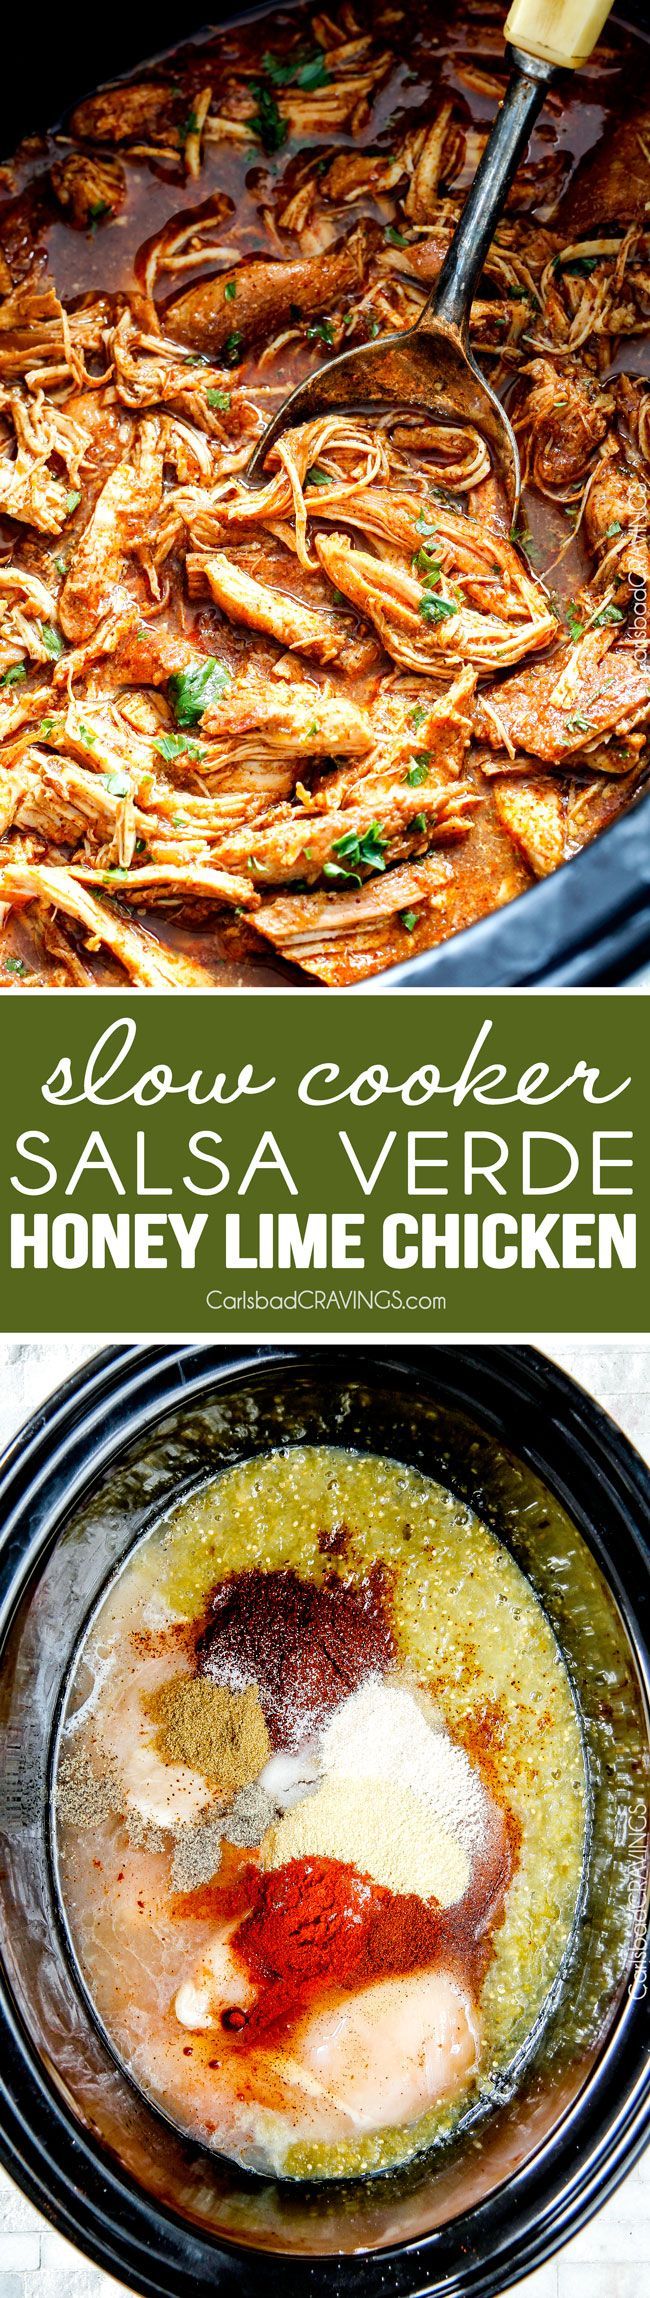 Slow Cooker Salsa Verde Honey Lime Chicken (and Tacos!) – the flavor of this chicken is out of this world! the best “dump and run”